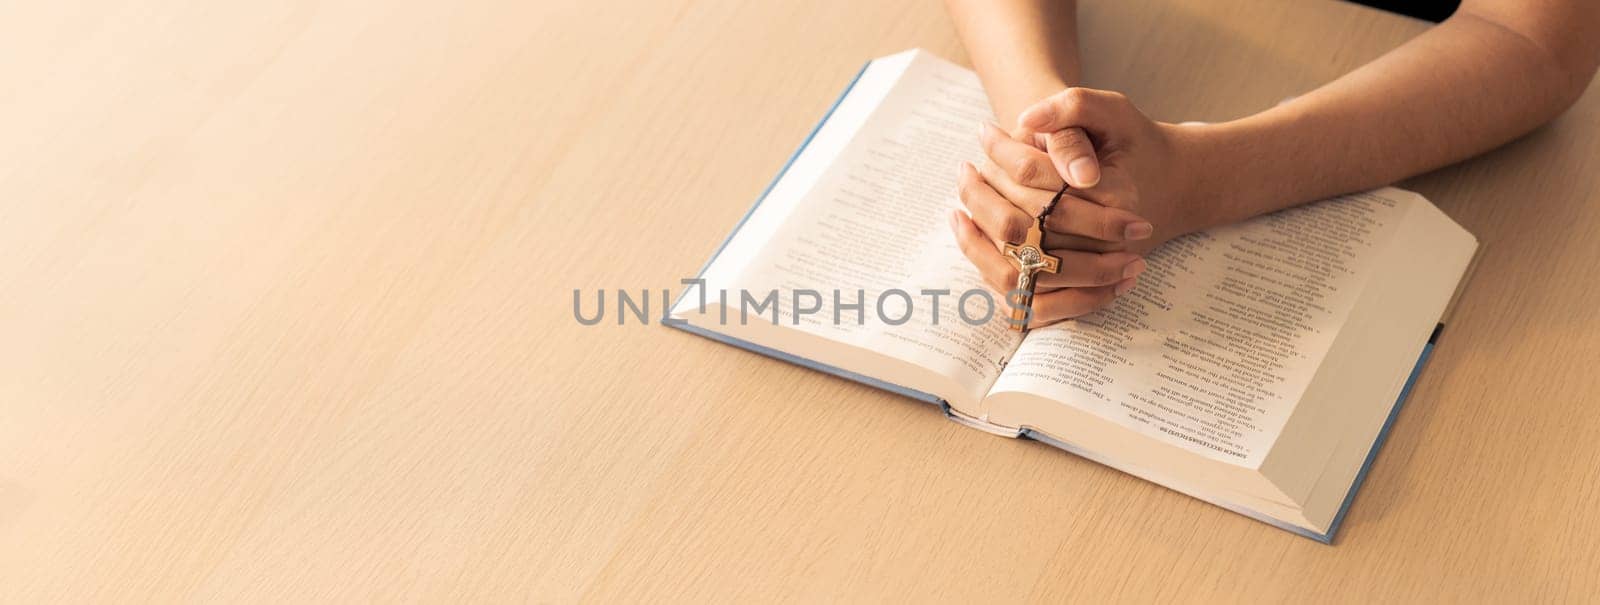 Cropped image of praying male hand holding cross on holy bible book at wooden table. Top view. Concept of hope, religion, faith, christianity and god blessing. Warm and brown background Burgeoning.